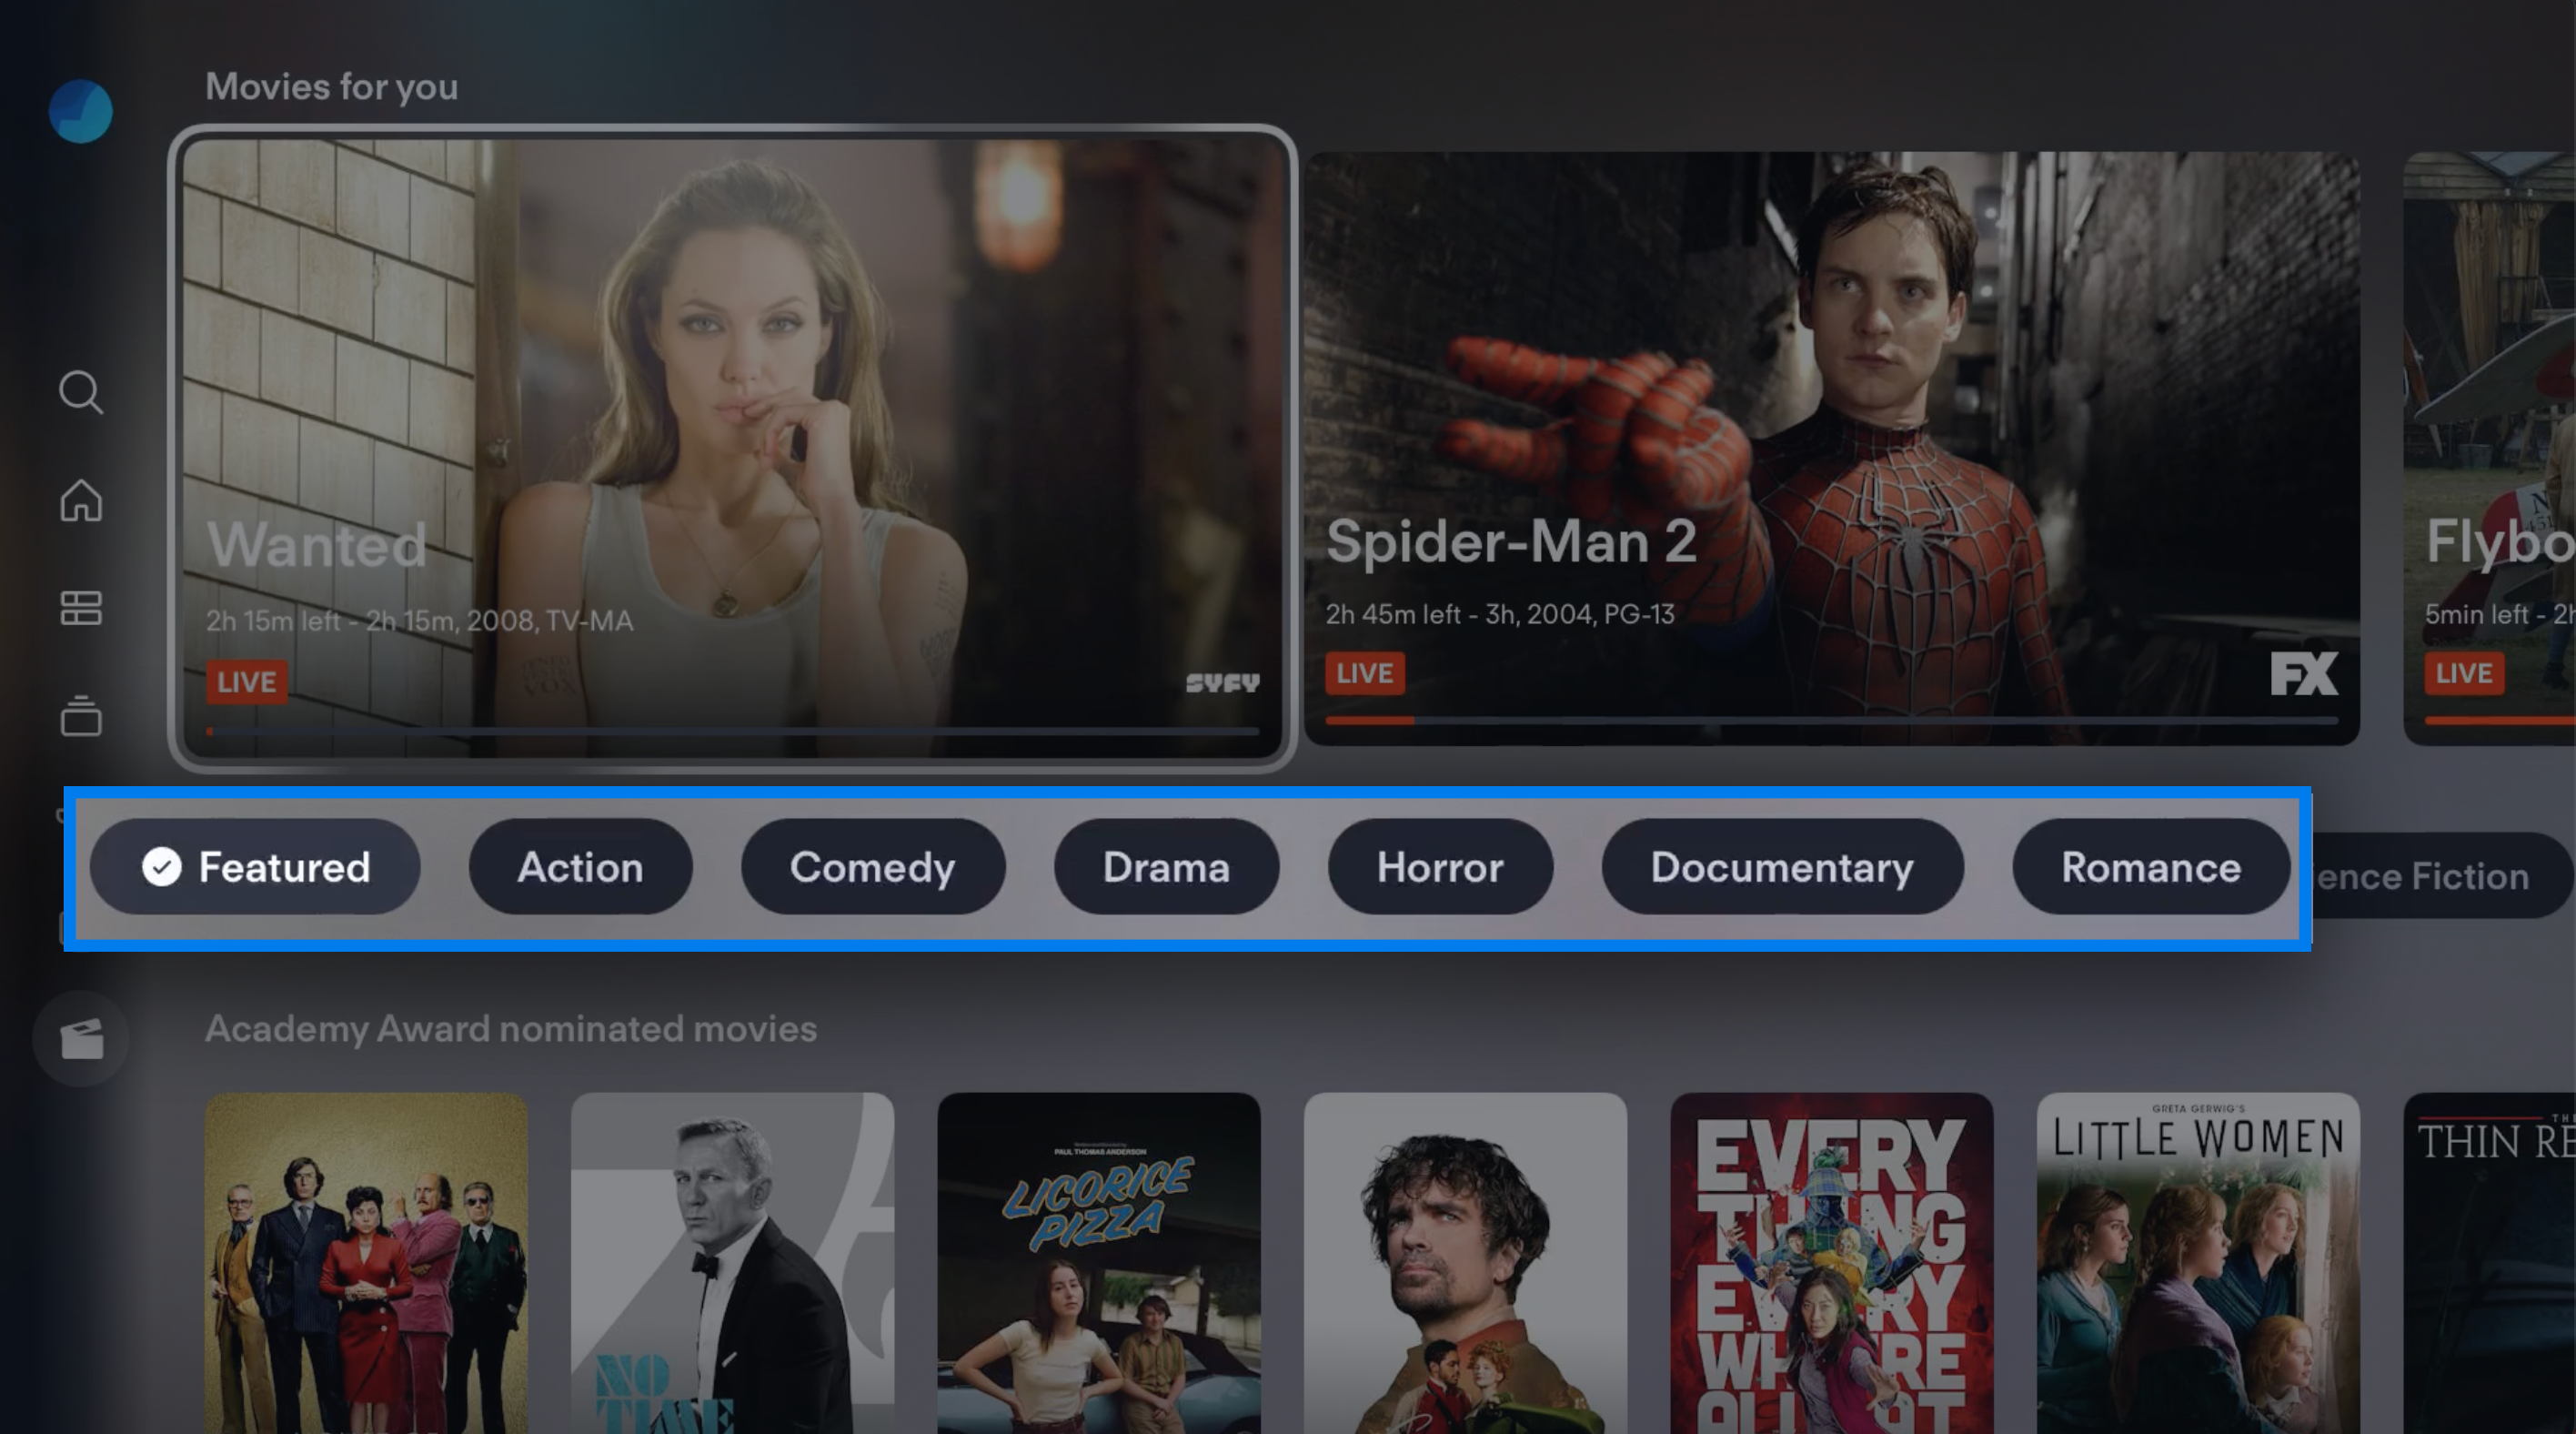 MOVIES screen of the FuboTV app on Apple TV with genre filters highlighted